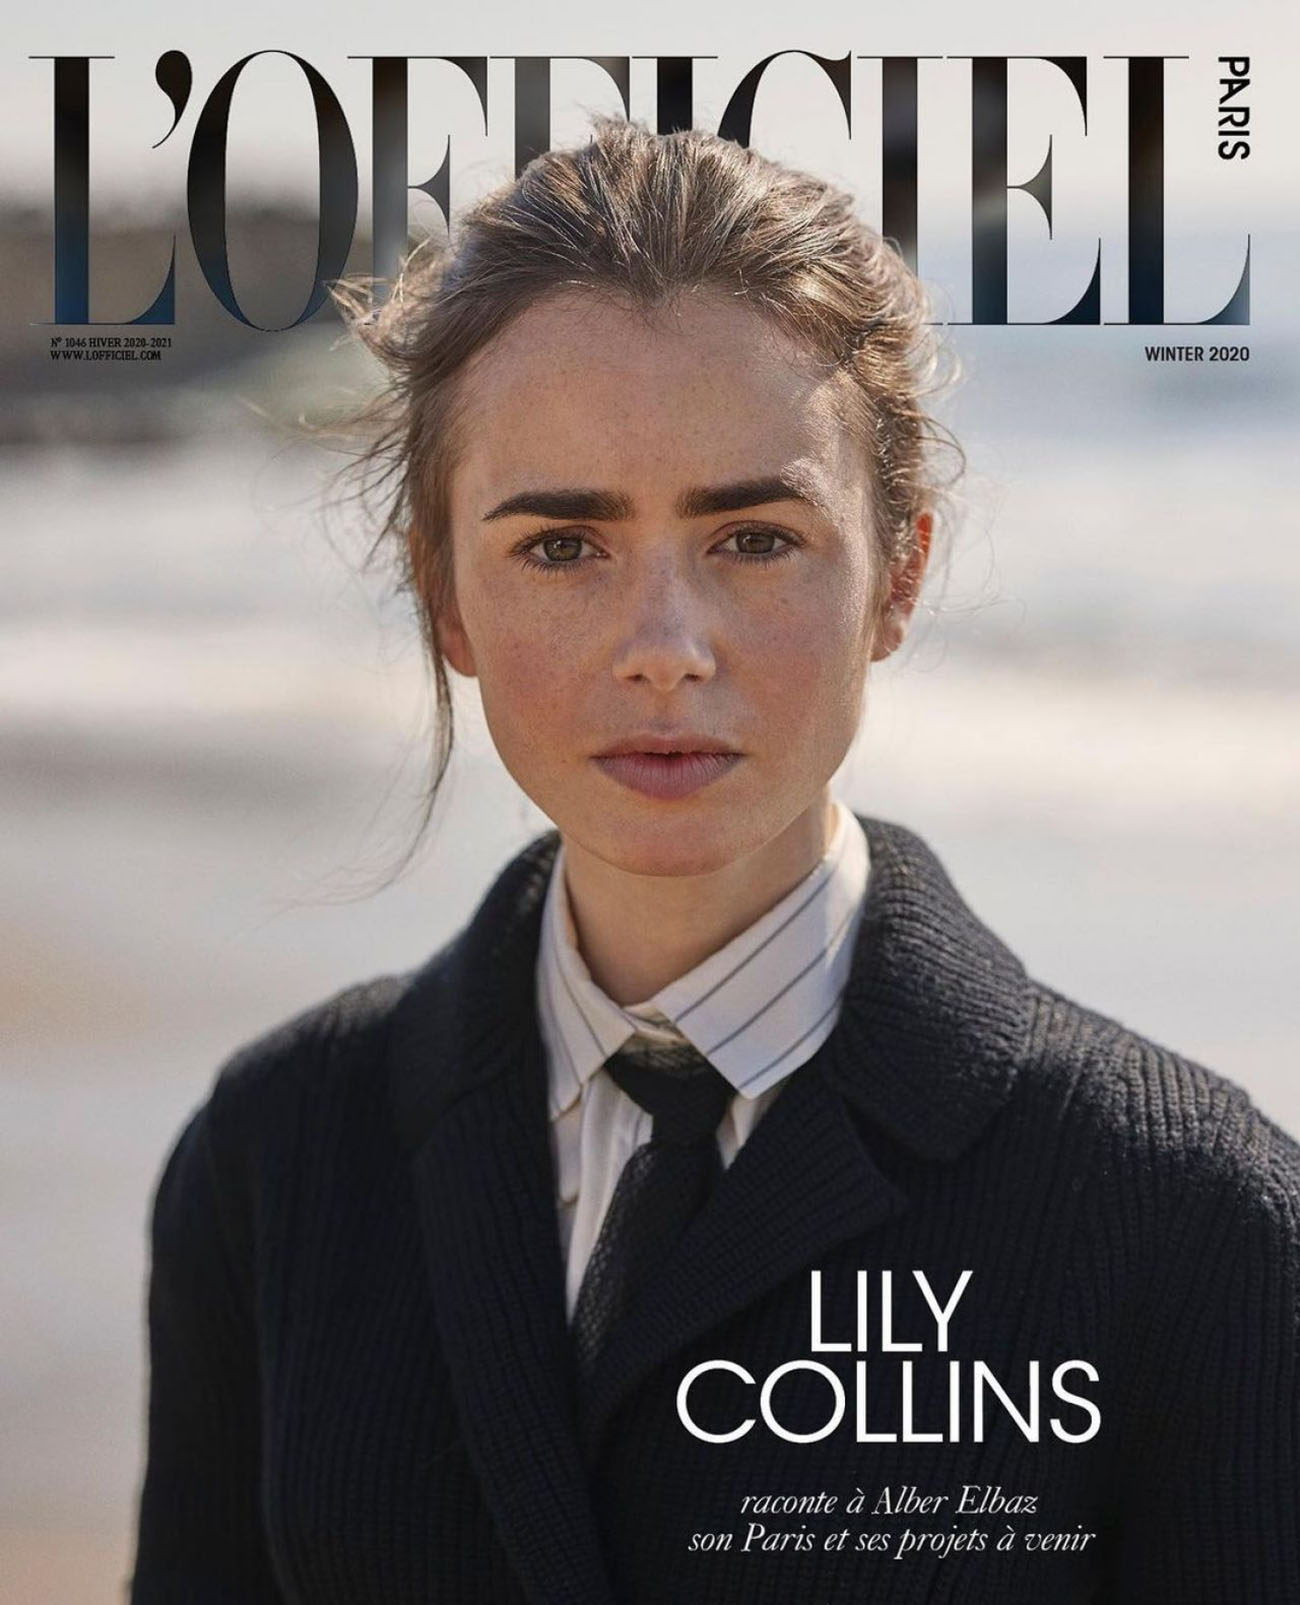 Lily Collins covers L'Officiel Global Winter 2020 by Sam Taylor Johnson